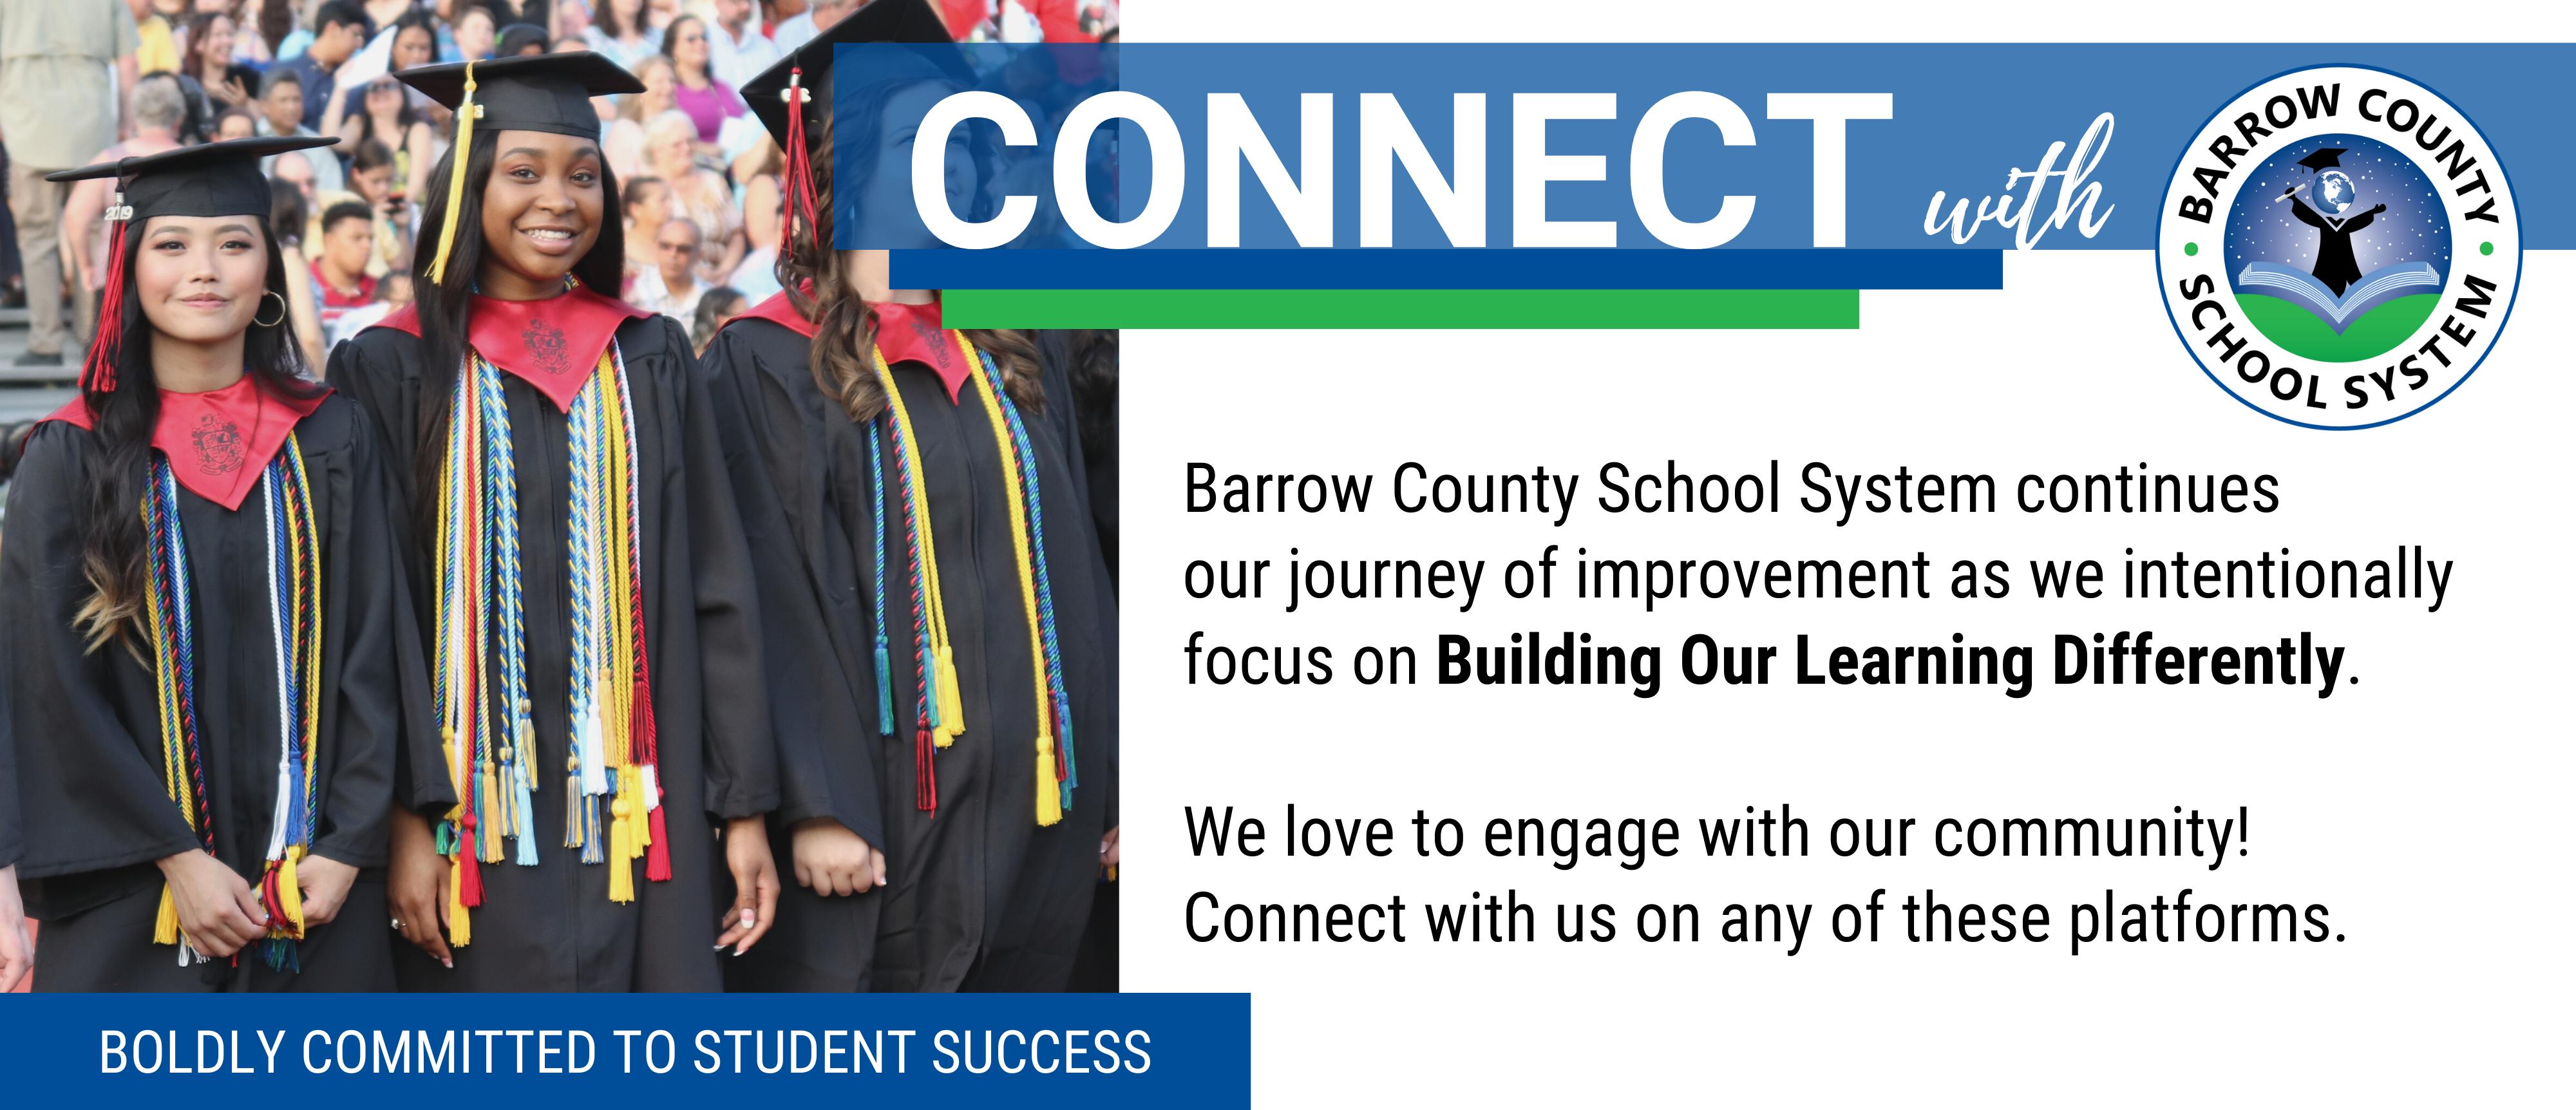 Connect with Barrow County School System